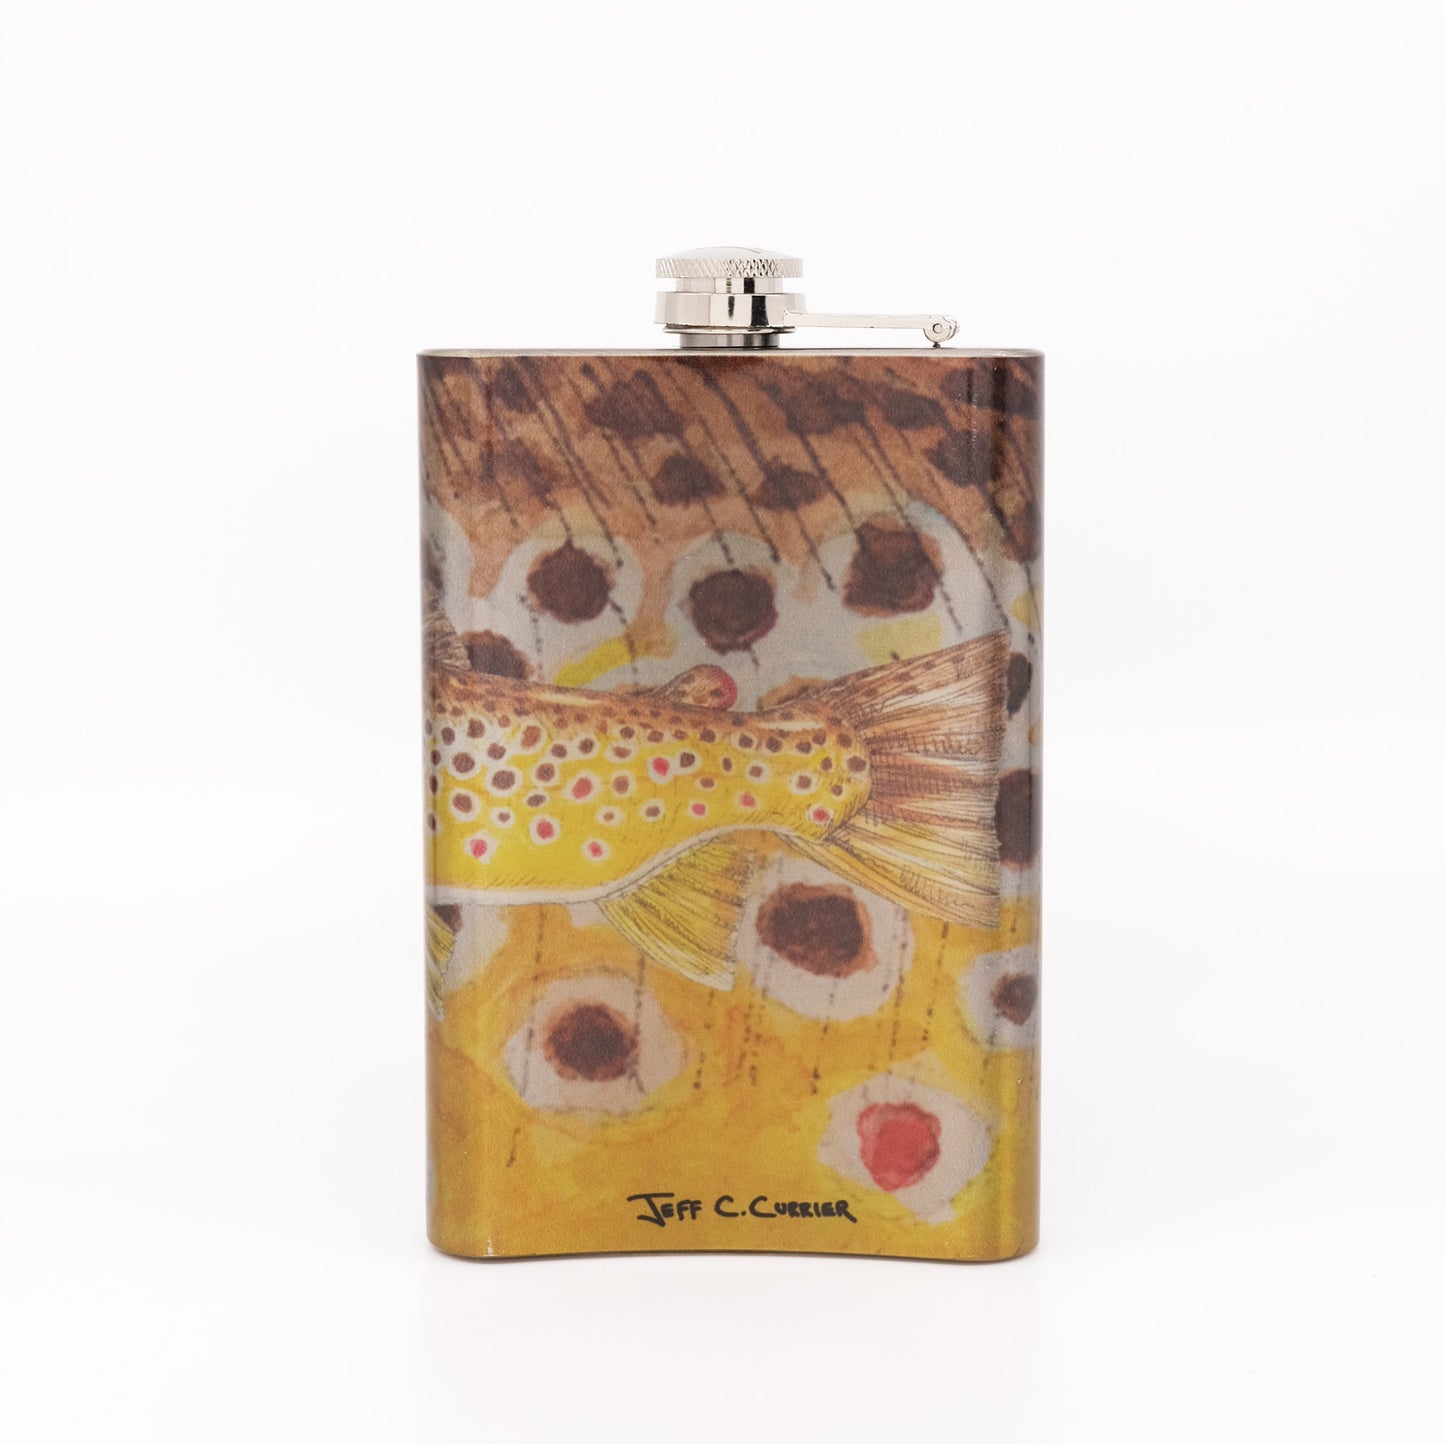 MFC Hip Flask - Currier's Brown